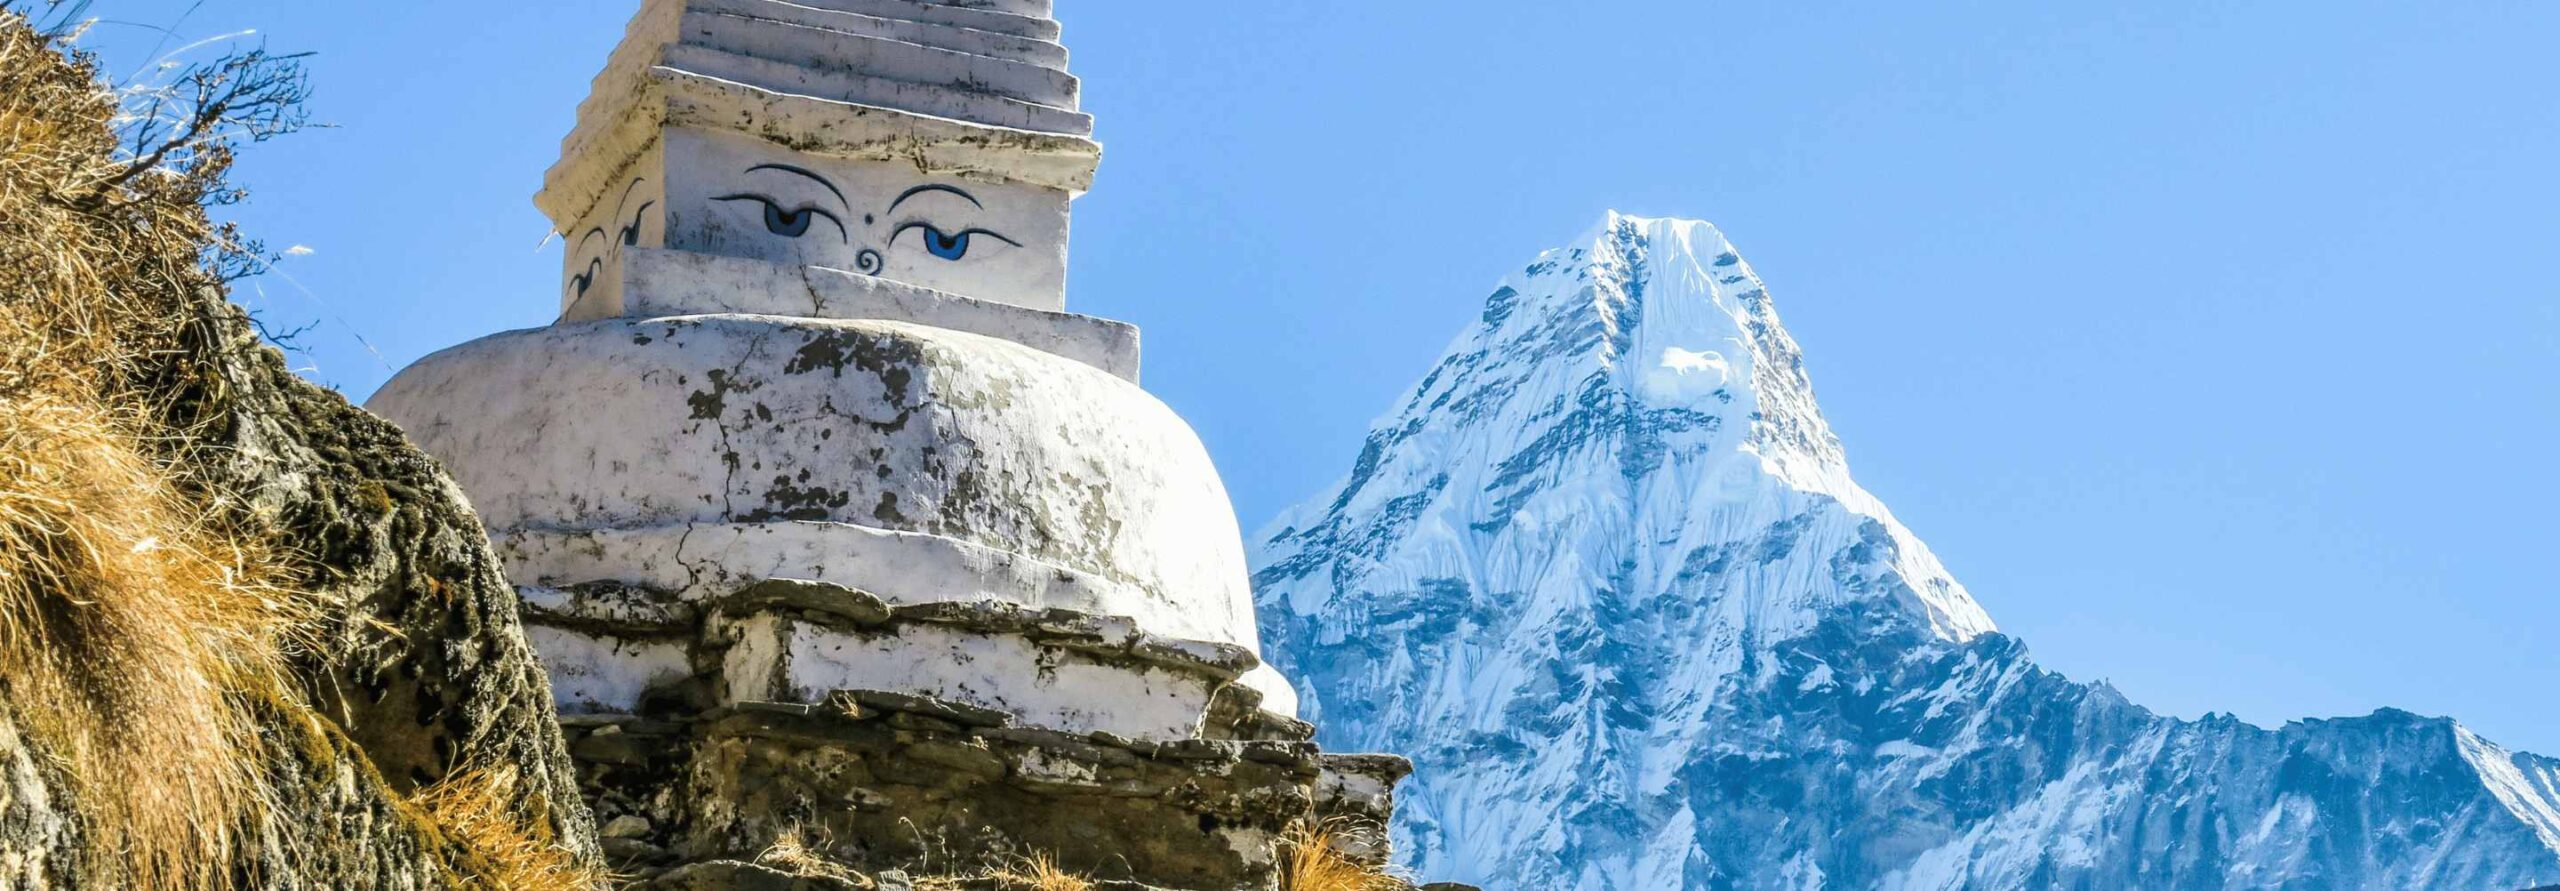 Should you go for the Everest Base Camp trek in March?